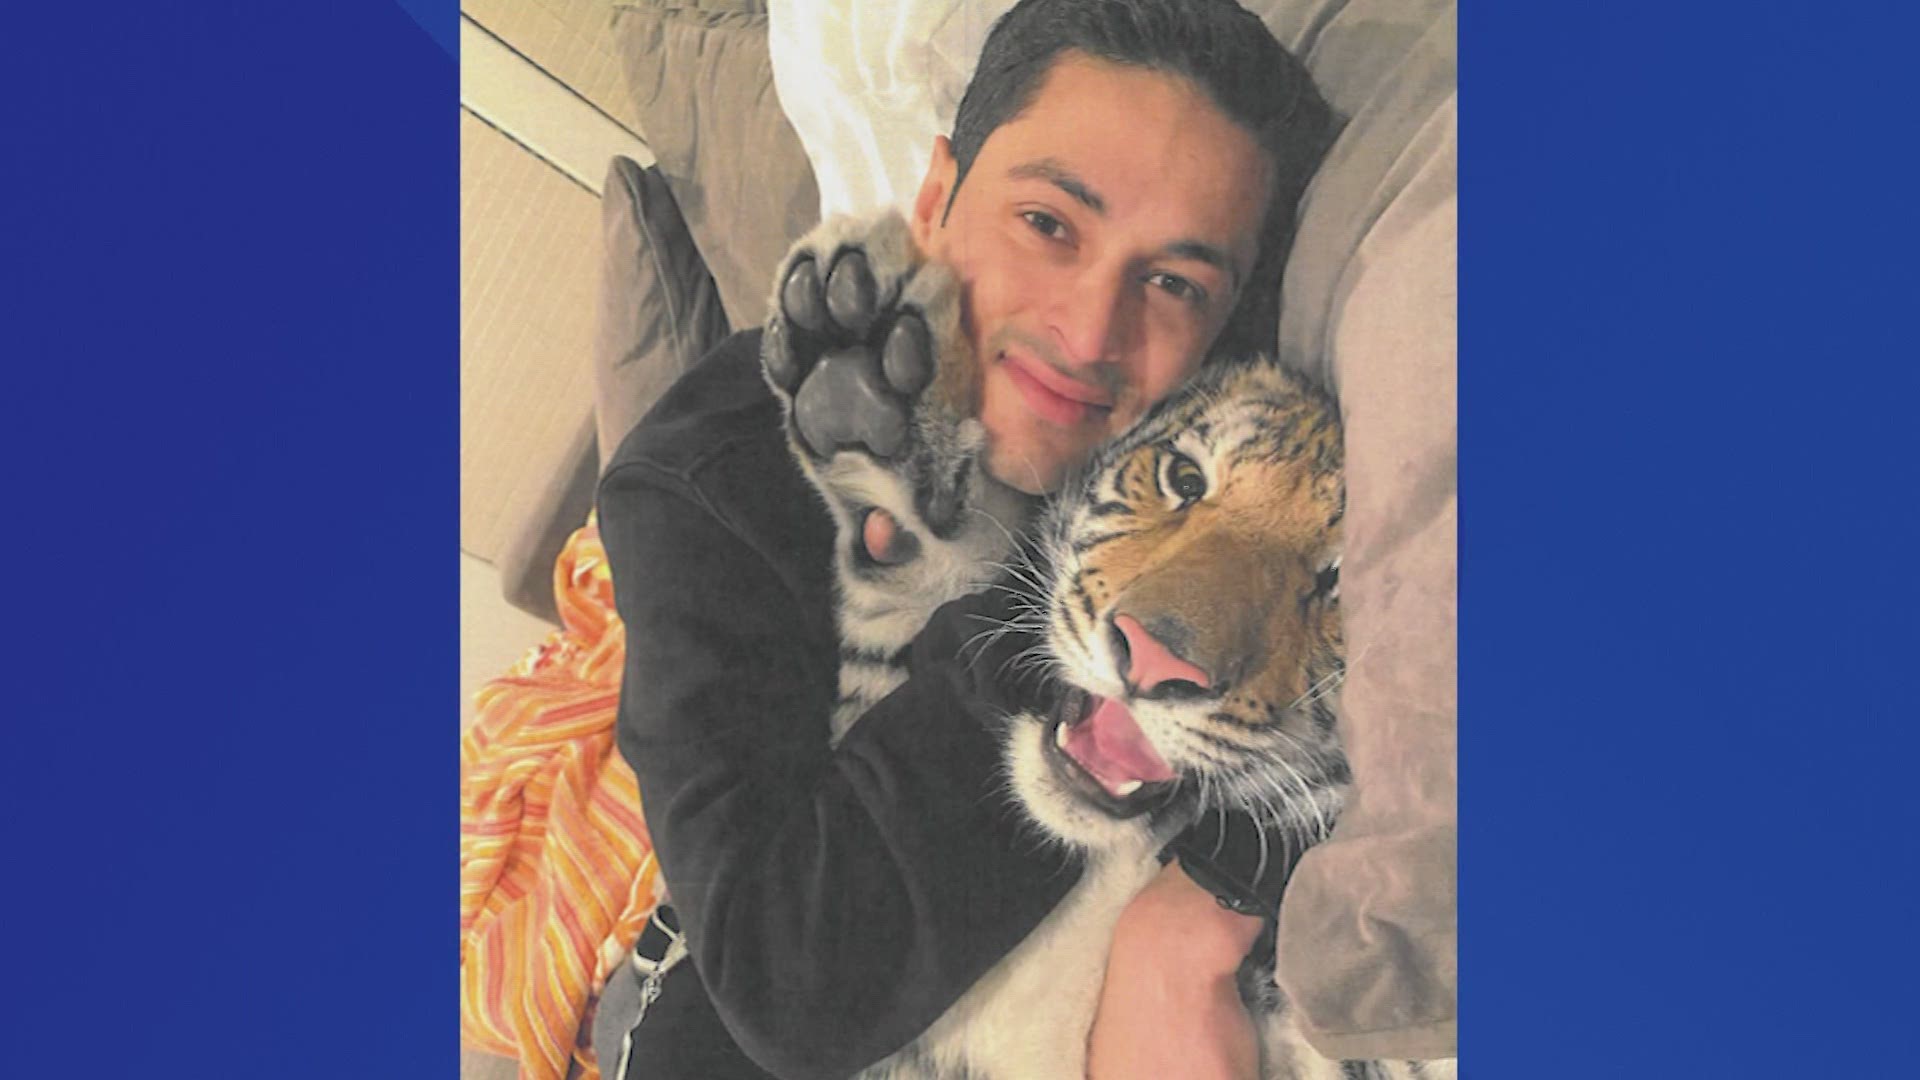 Victor Cuevas' attorney released new photos and a video of Cuevas with the tiger taken over the past several months.